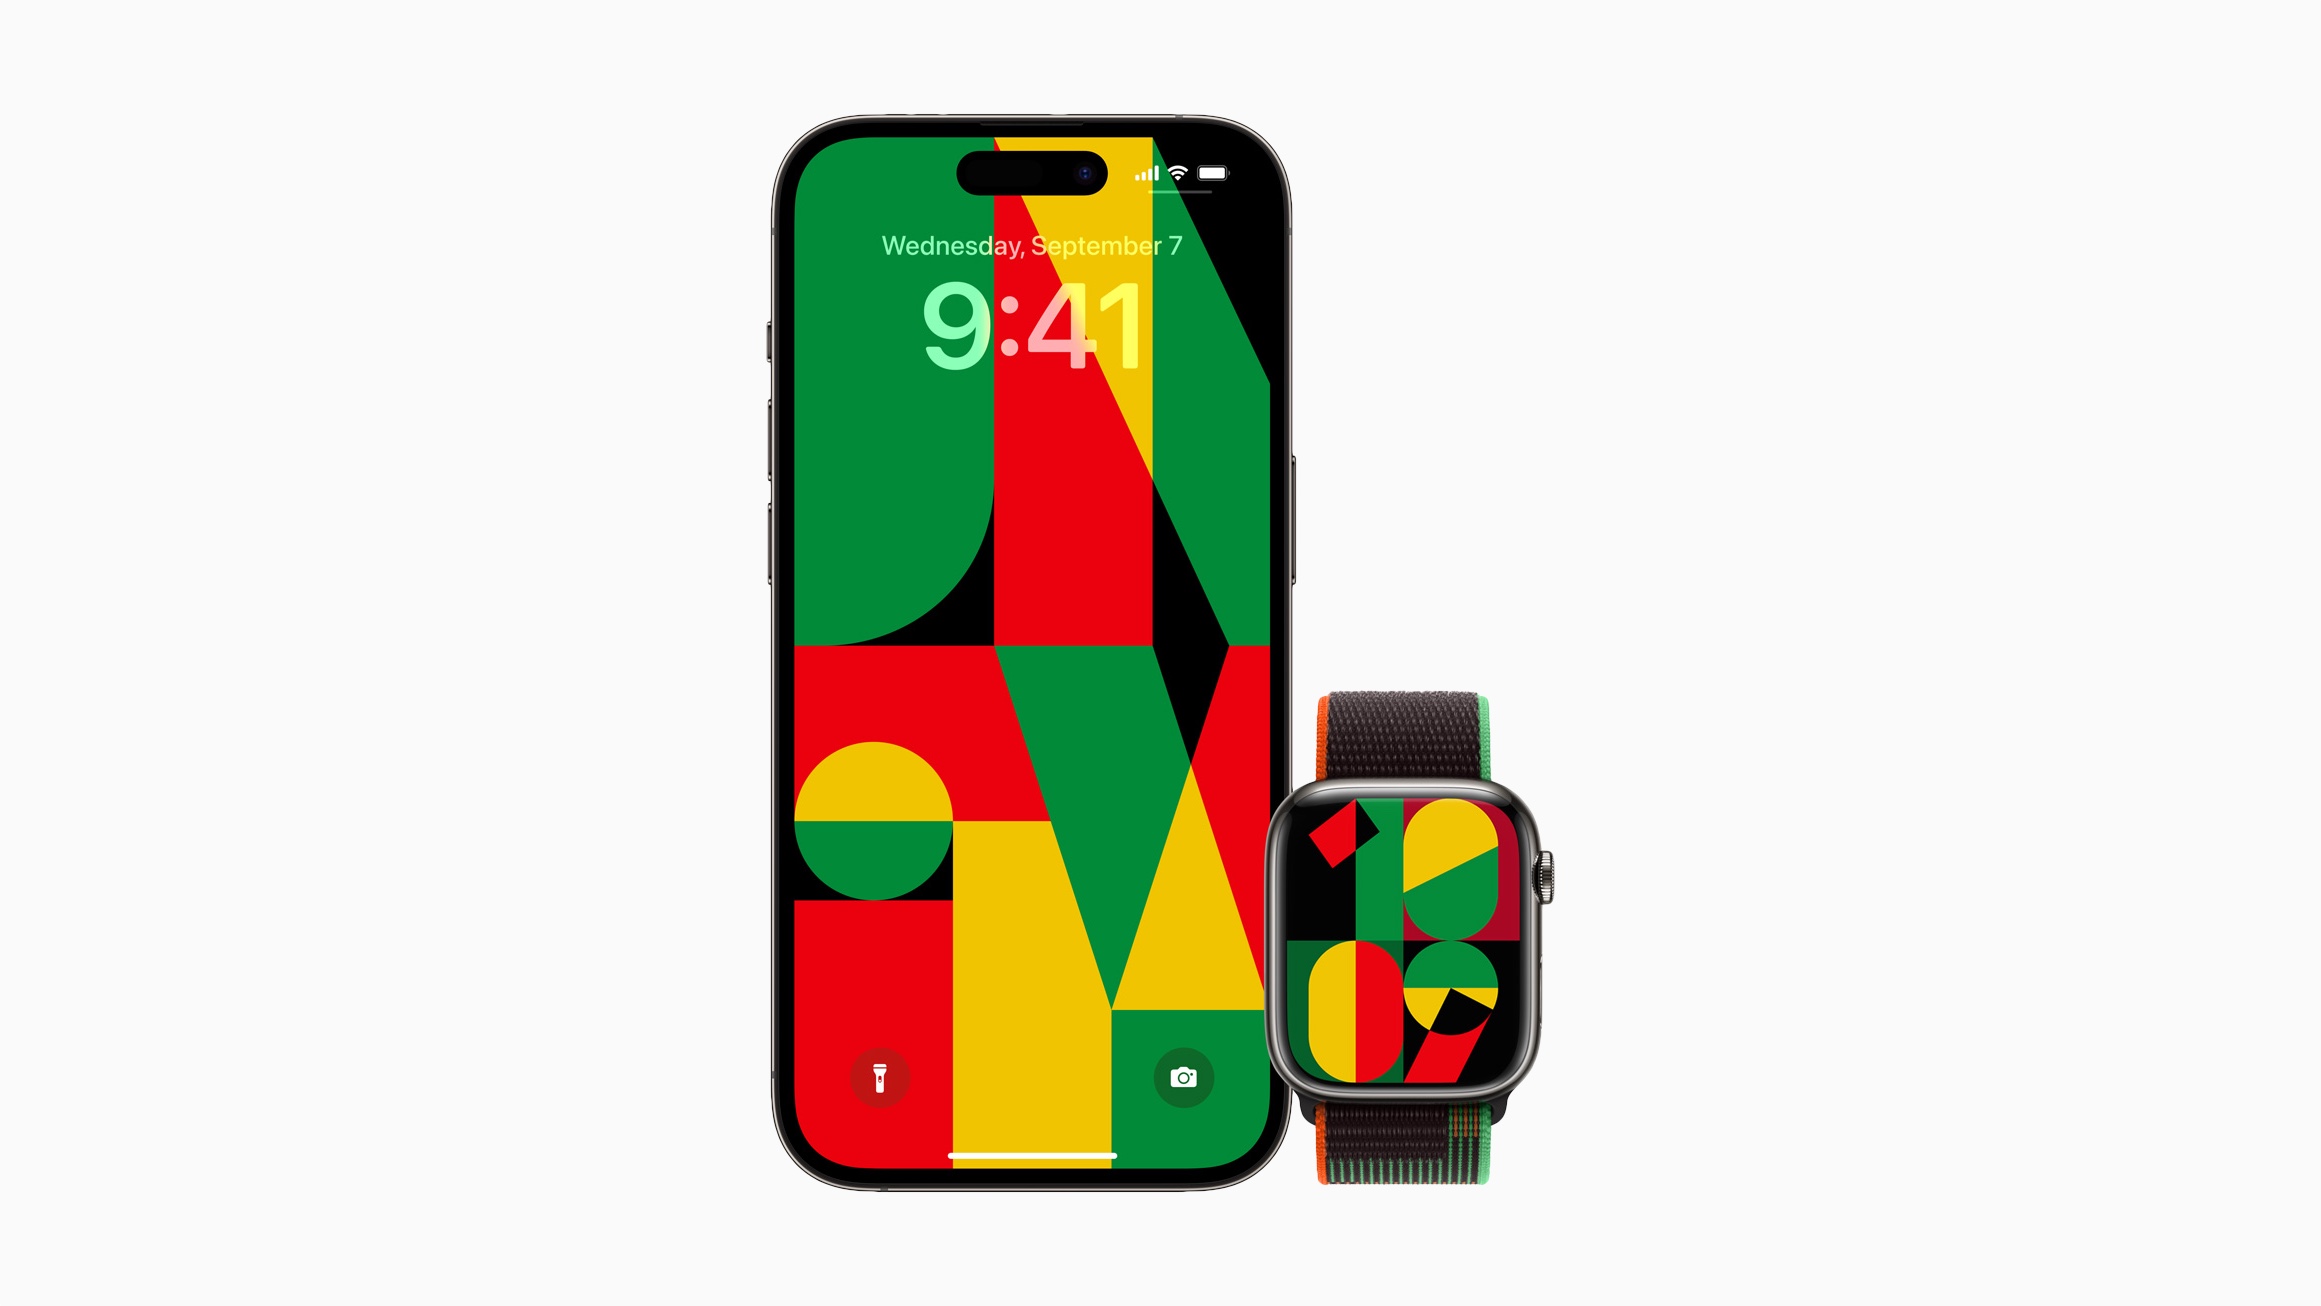 The Apple Watch Black Unity Sport Loop, watch face, and iPhone wallpaper are inspired by the creative process of mosaic, the vibrancy of Black communities, and the power of unity.